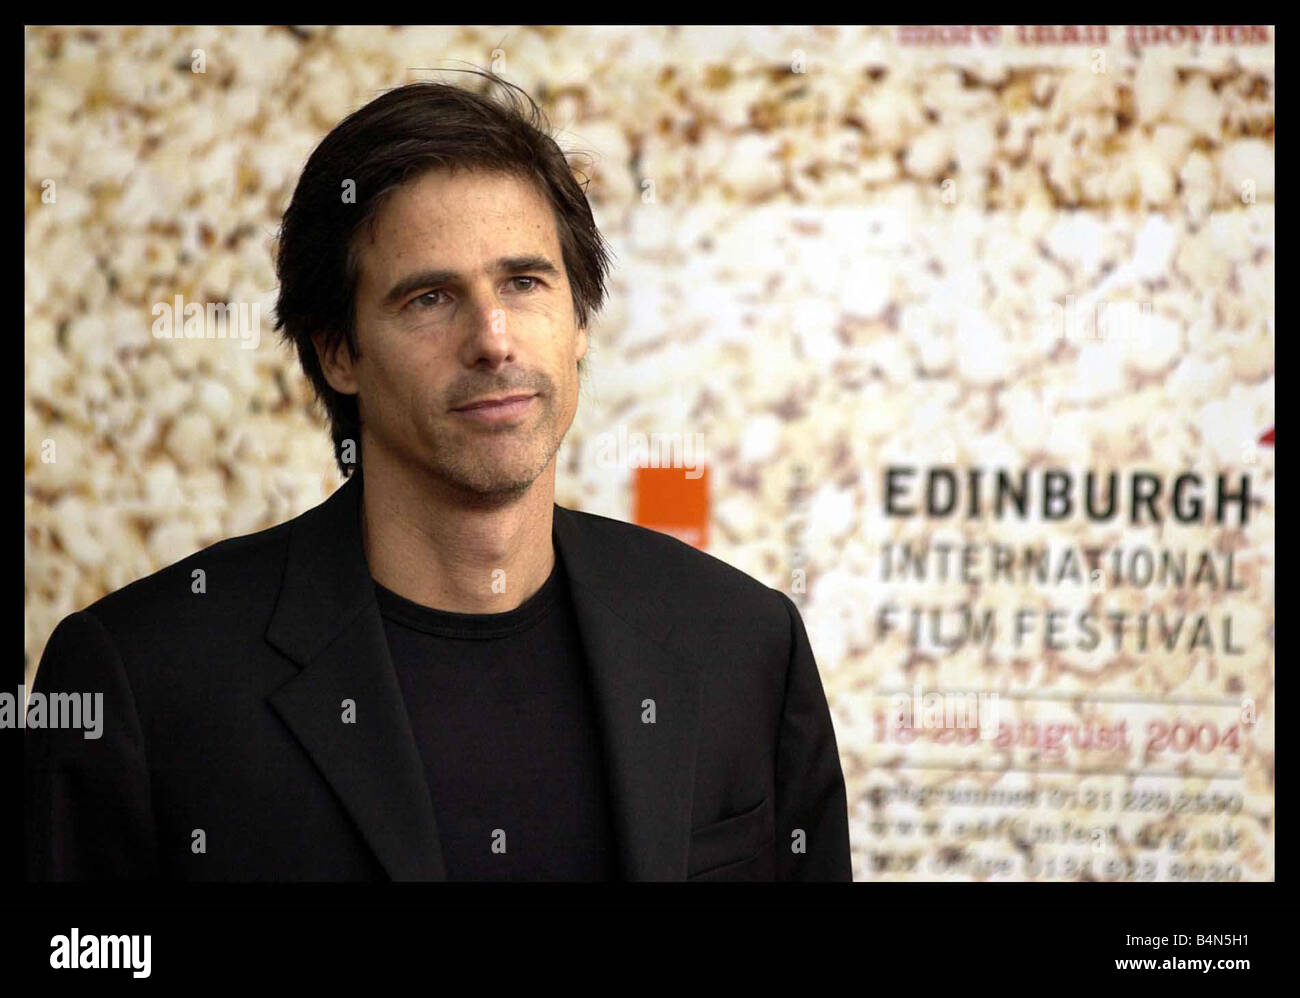 Walter Salles director of The Motorcycle Diaries at the Edinburgh Film Festival August 2004 Stock Photo